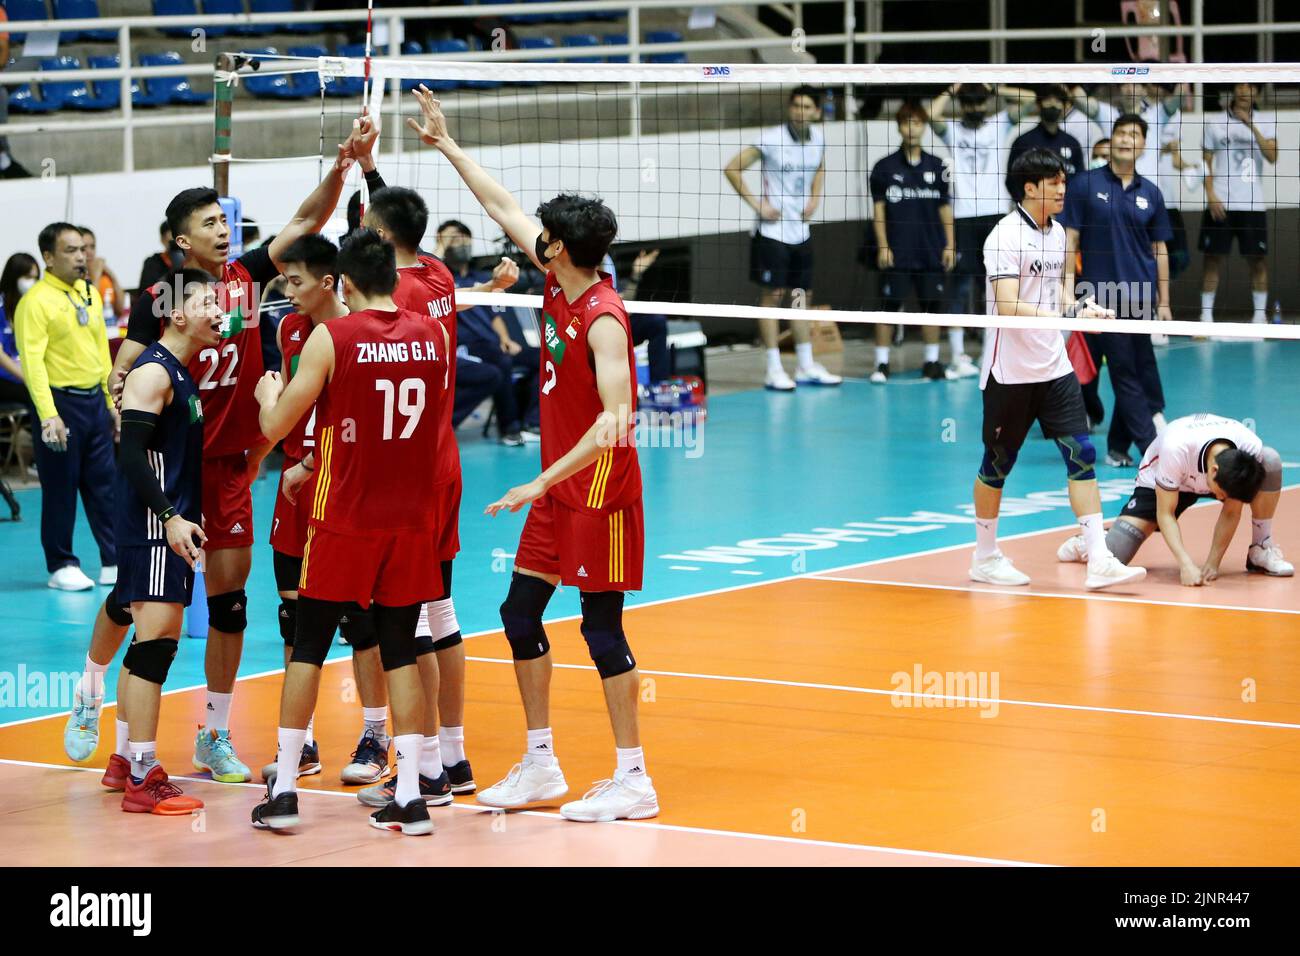 Nakhon Pathom, Thailand. 13th Aug, 2022. Players of China celebrate scoring during a 2022 AVC (Asian Volleyball Confederation) Cup match between China and South Korea in Nakhon Pathom, Thailand, Aug. 13, 2022. Credit: Wang Teng/Xinhua/Alamy Live News Stock Photo